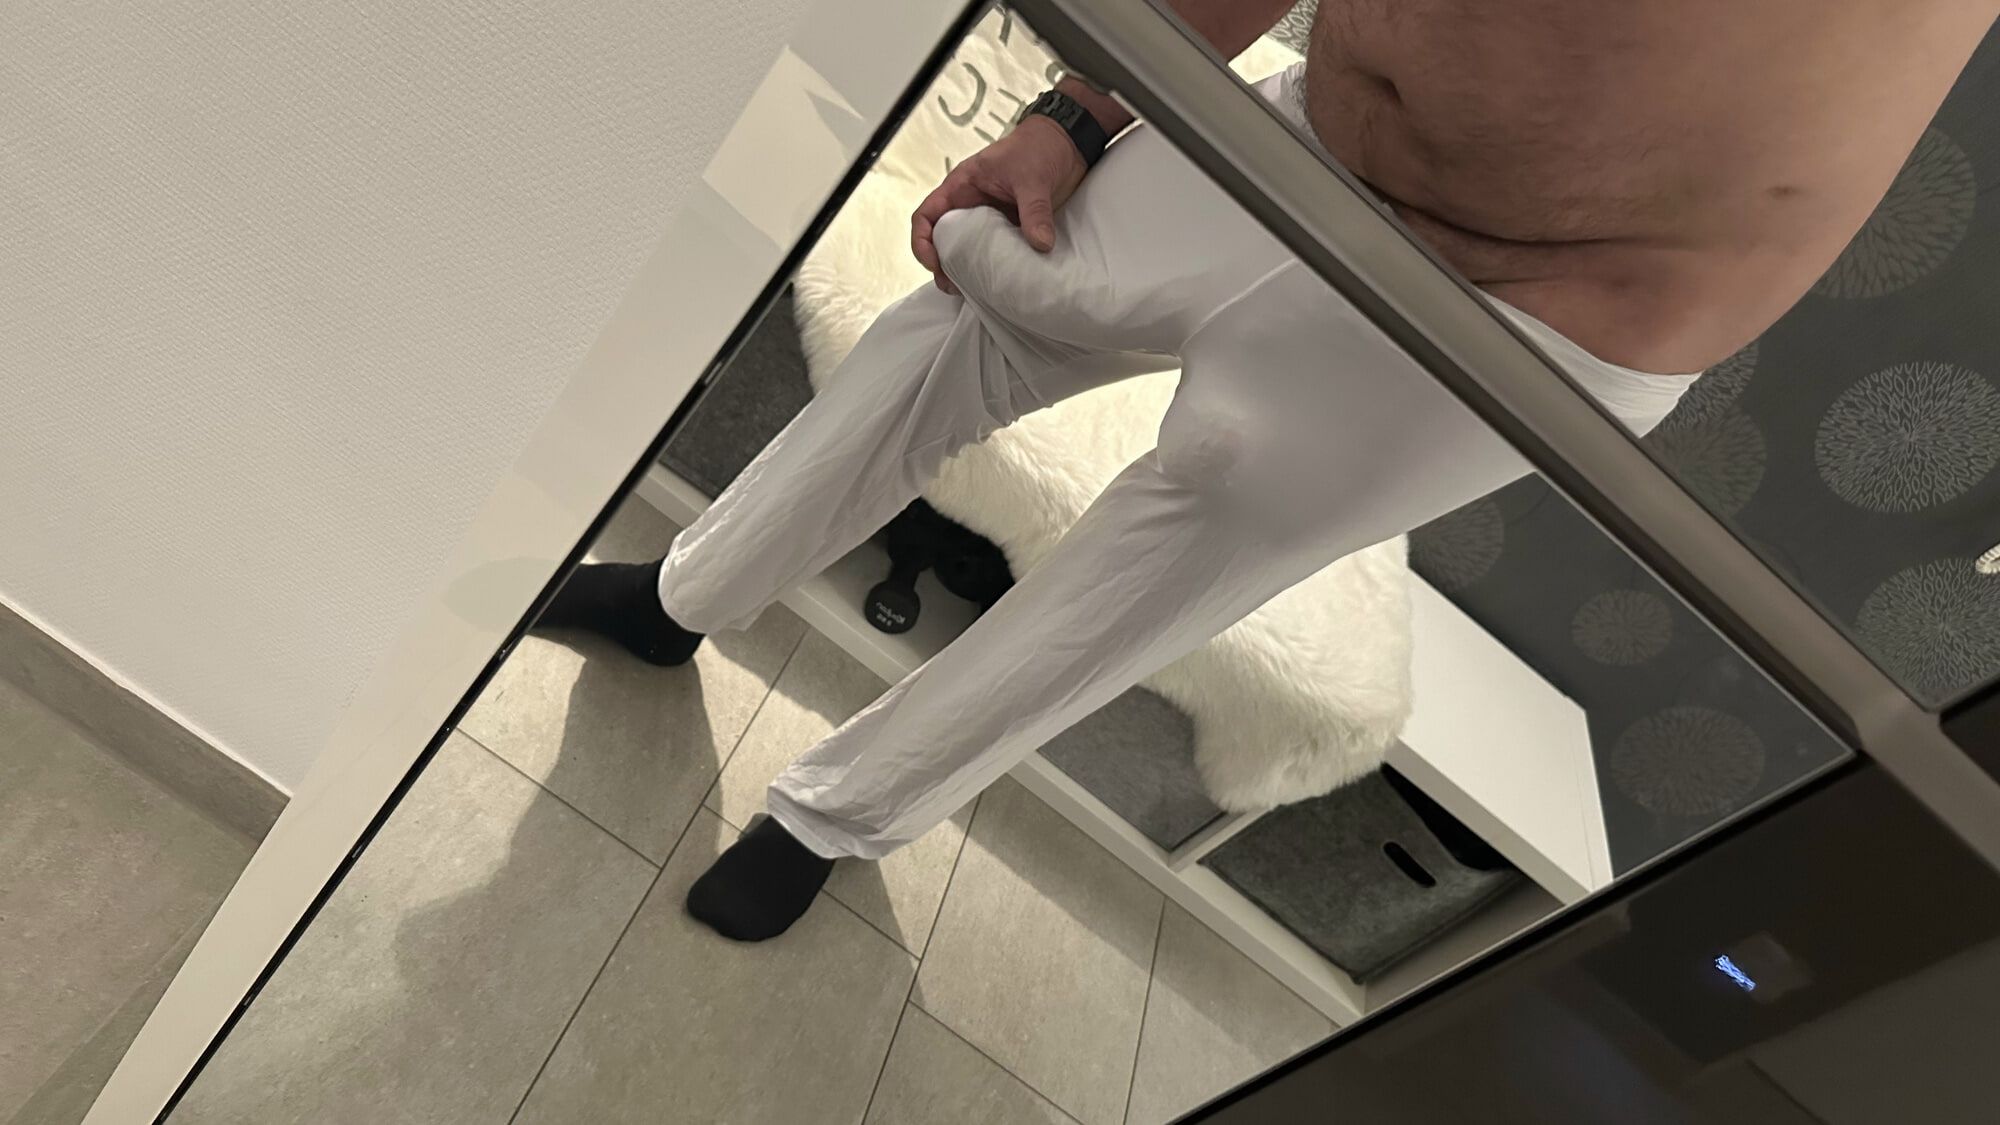 XXL Cock with Pants #6